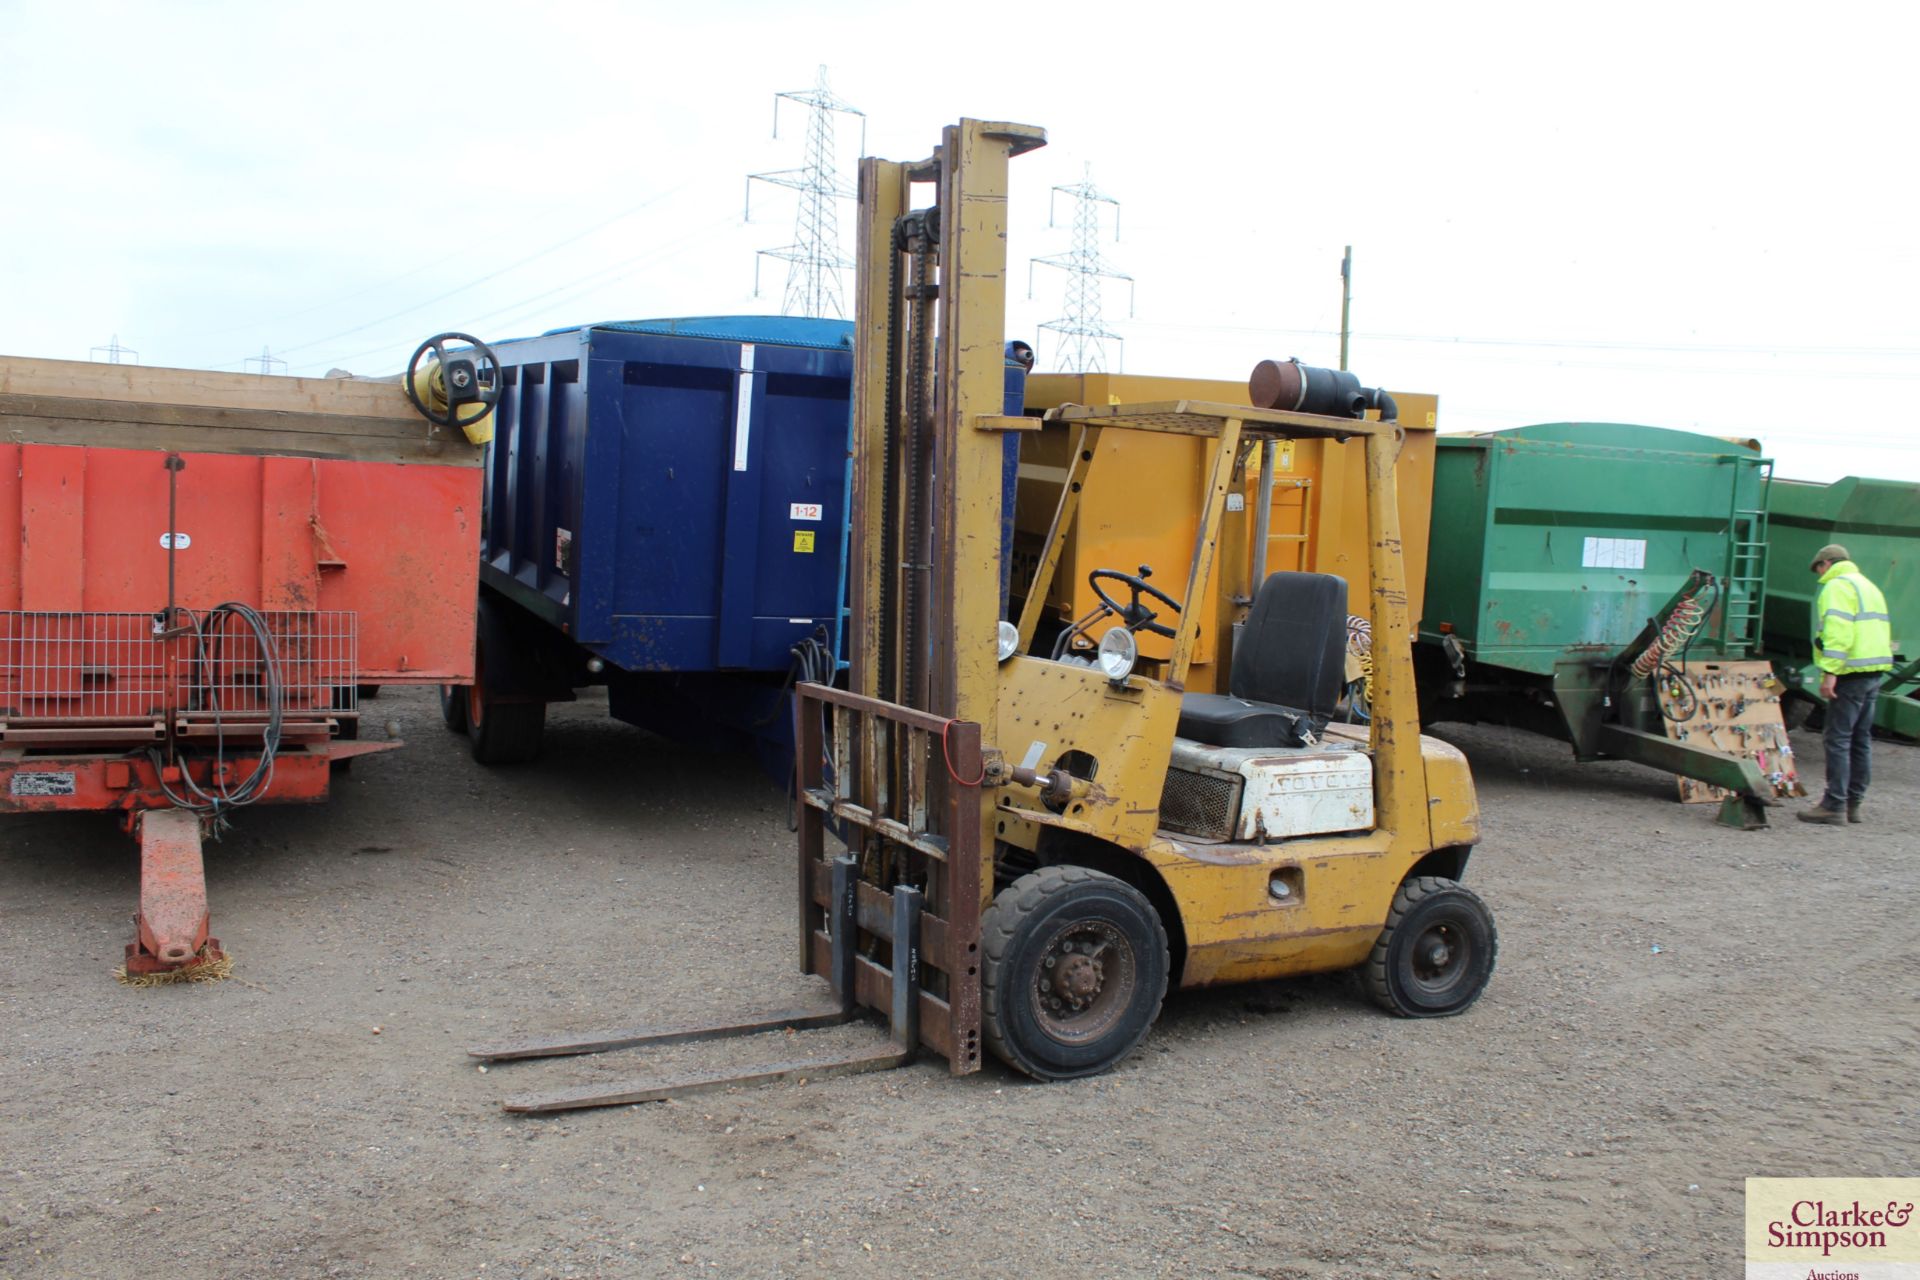 Toyota 02-2FD20 2T diesel forklift.4x366 hours. Vendor reports brakes need attention. V